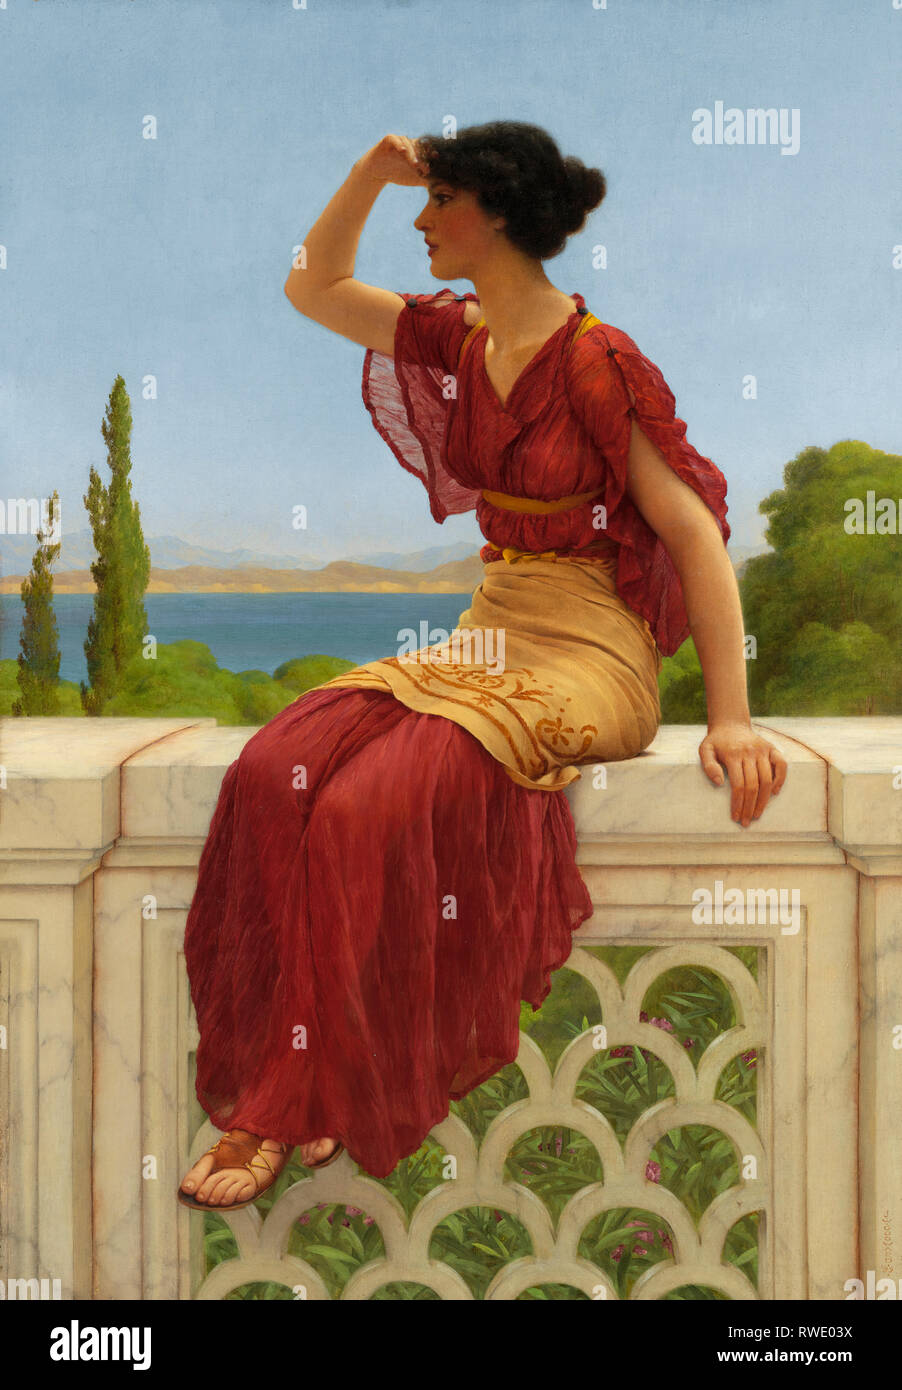 The Signal; John William Godward (English, 1861 - 1922); 1899; Oil on canvas; Digital image courtesy of the Getty's Open Content Program. Stock Photo